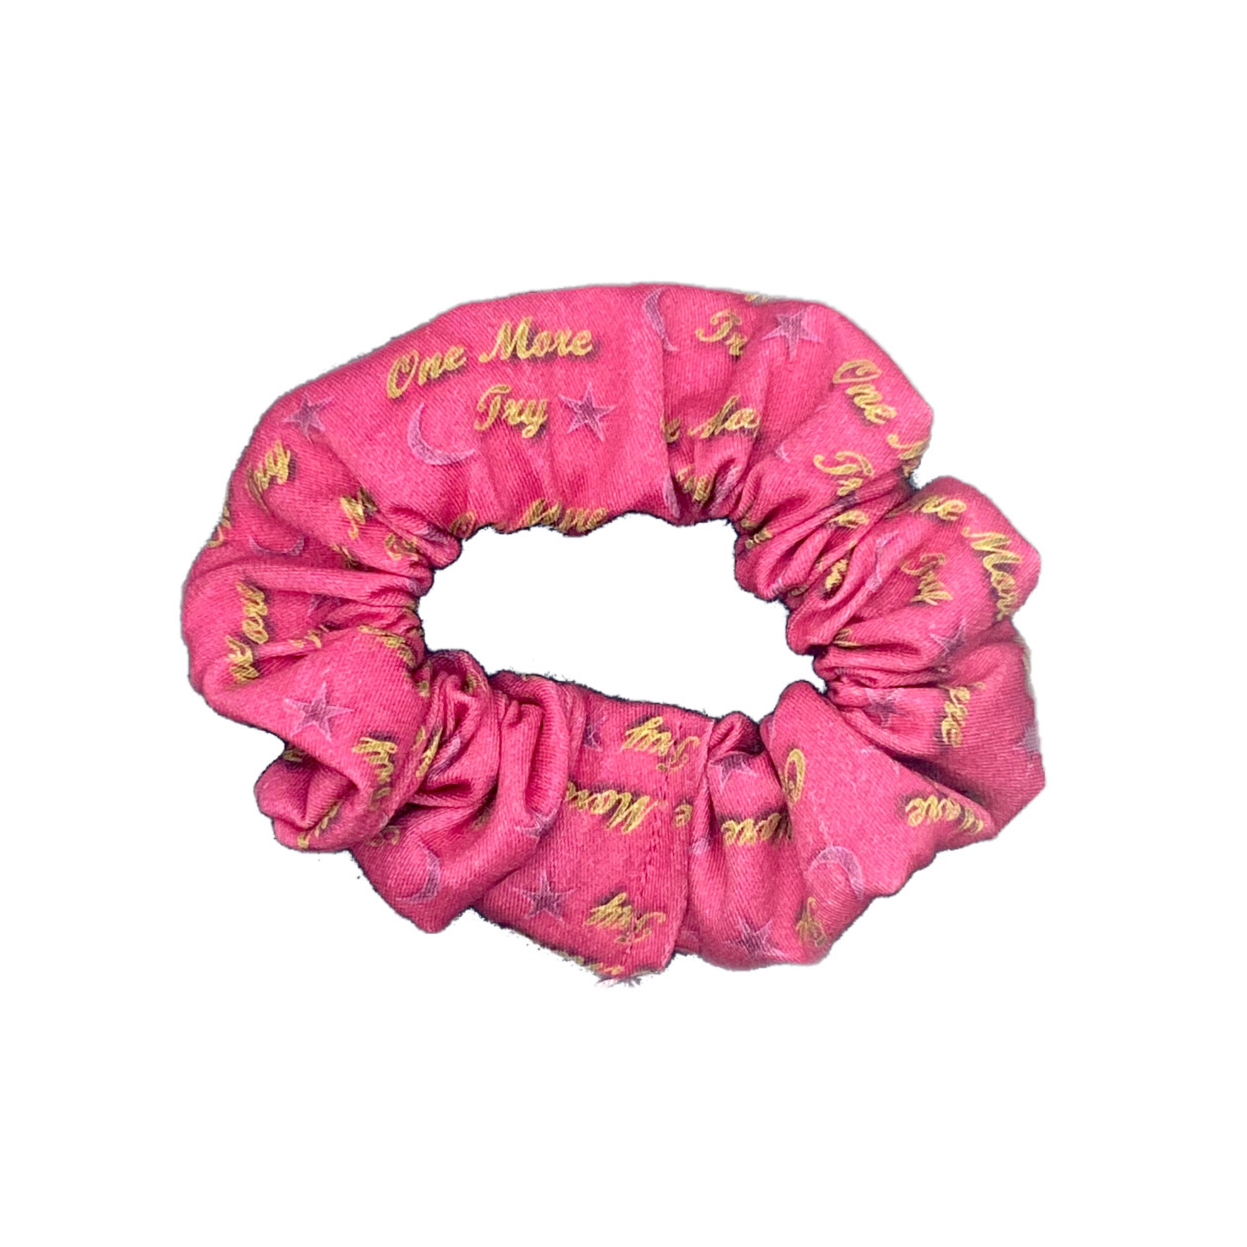 One More Try Scrunchie - Inspired by &Juliet